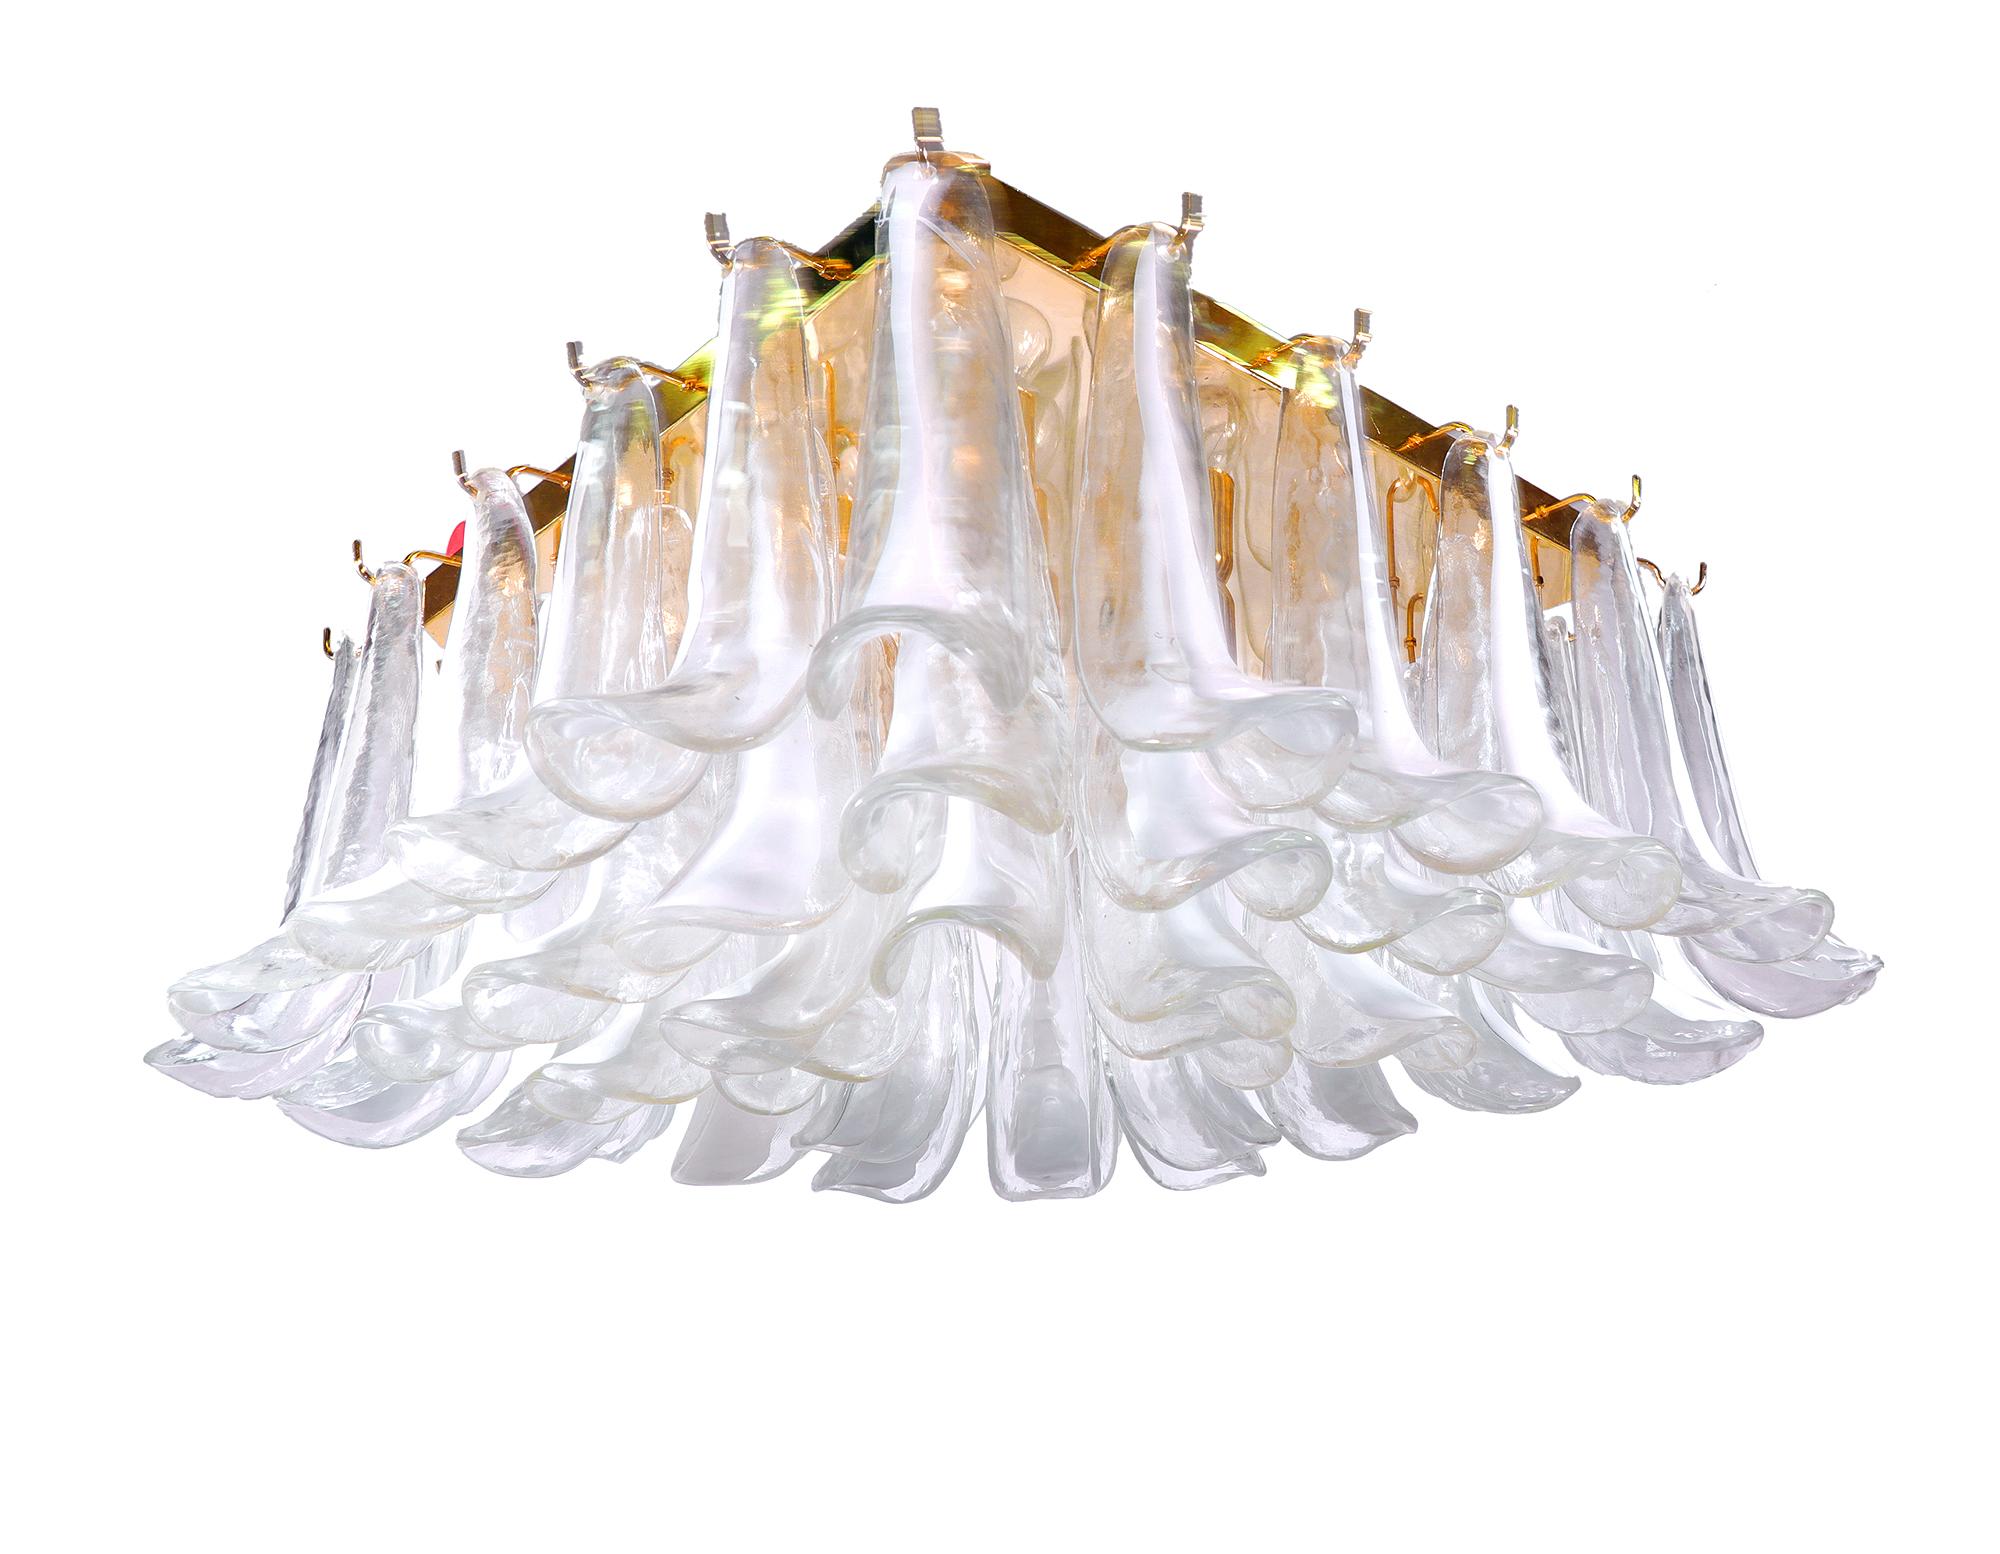 Elegant large square Murano glass flush mount petal chandelier. The color of the 52 glass petals goes from white to clear and fixed on a gilded brass frame. Some petals are branded, as imaged. Manufactured by Mazzaga, Italy in the 1970s. 

Design: